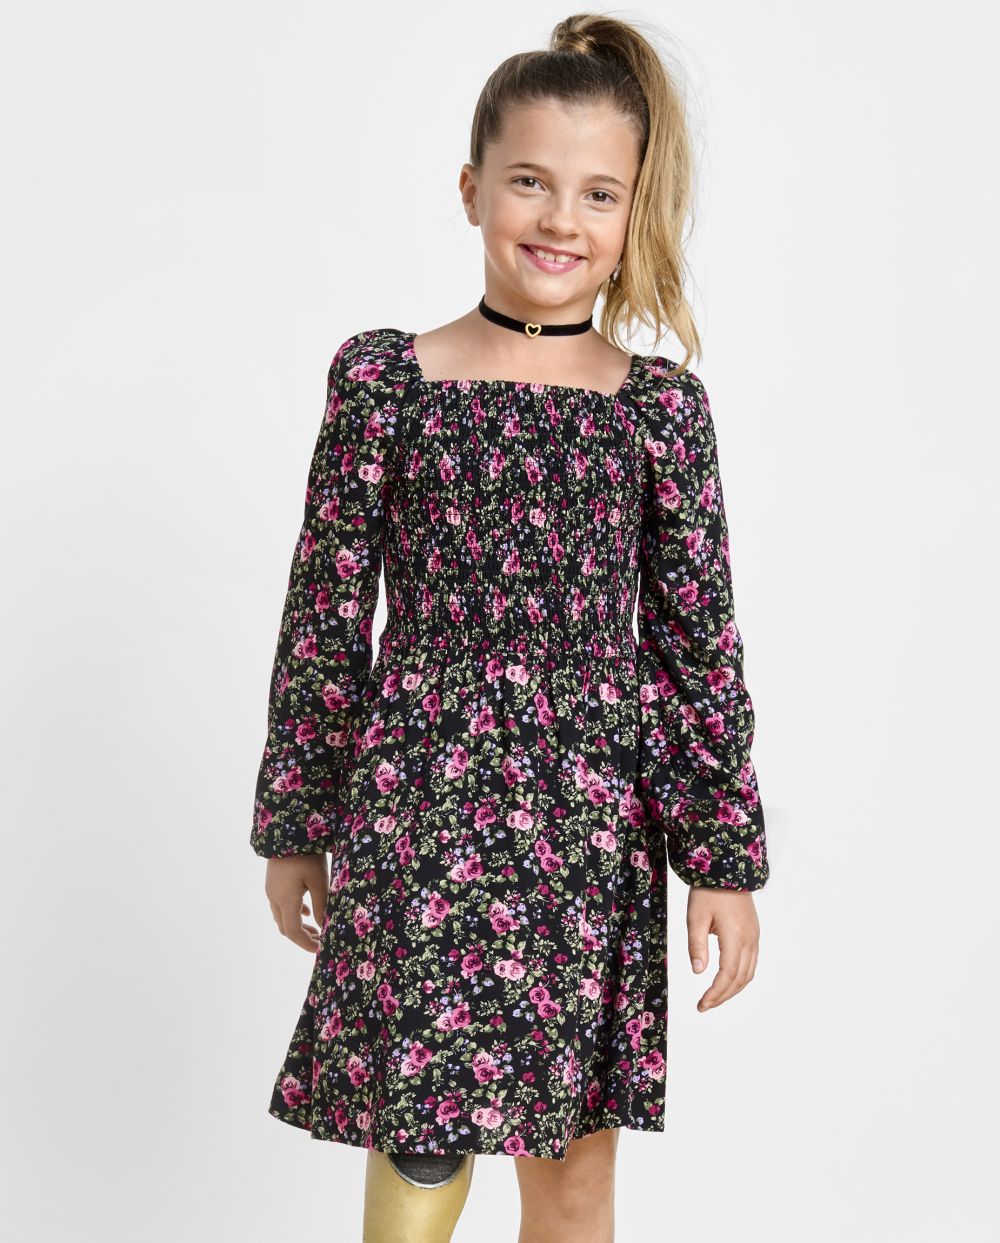 Girls Long Sleeves Rayon Floral Print Above the Knee Smocked Square Neck Dress